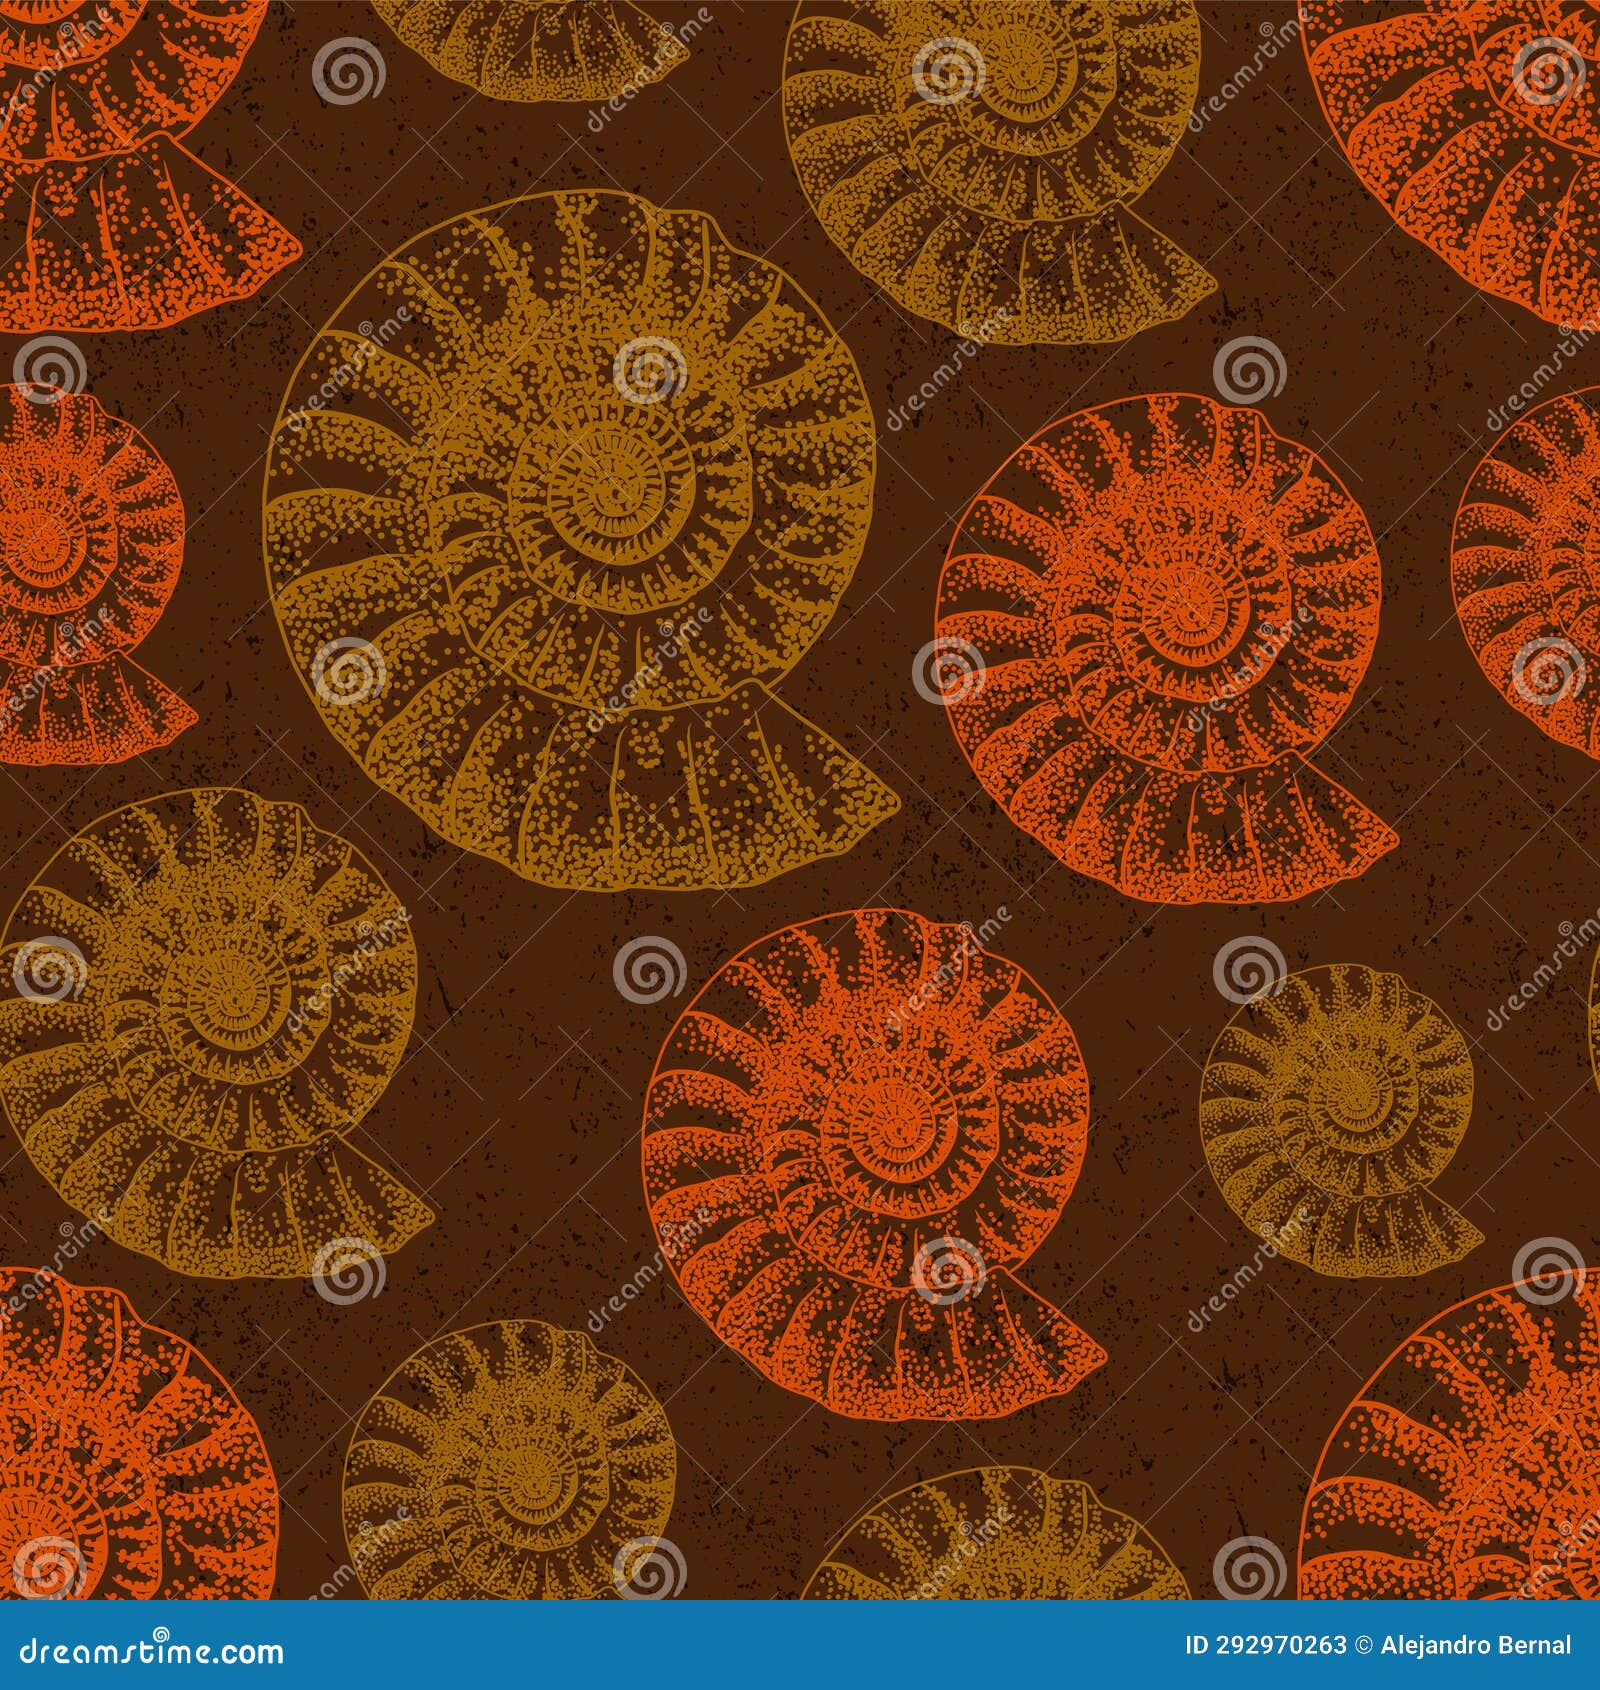 beautiful brown and orange ammonite fossils seamles pattern sketck over brown worn out effect